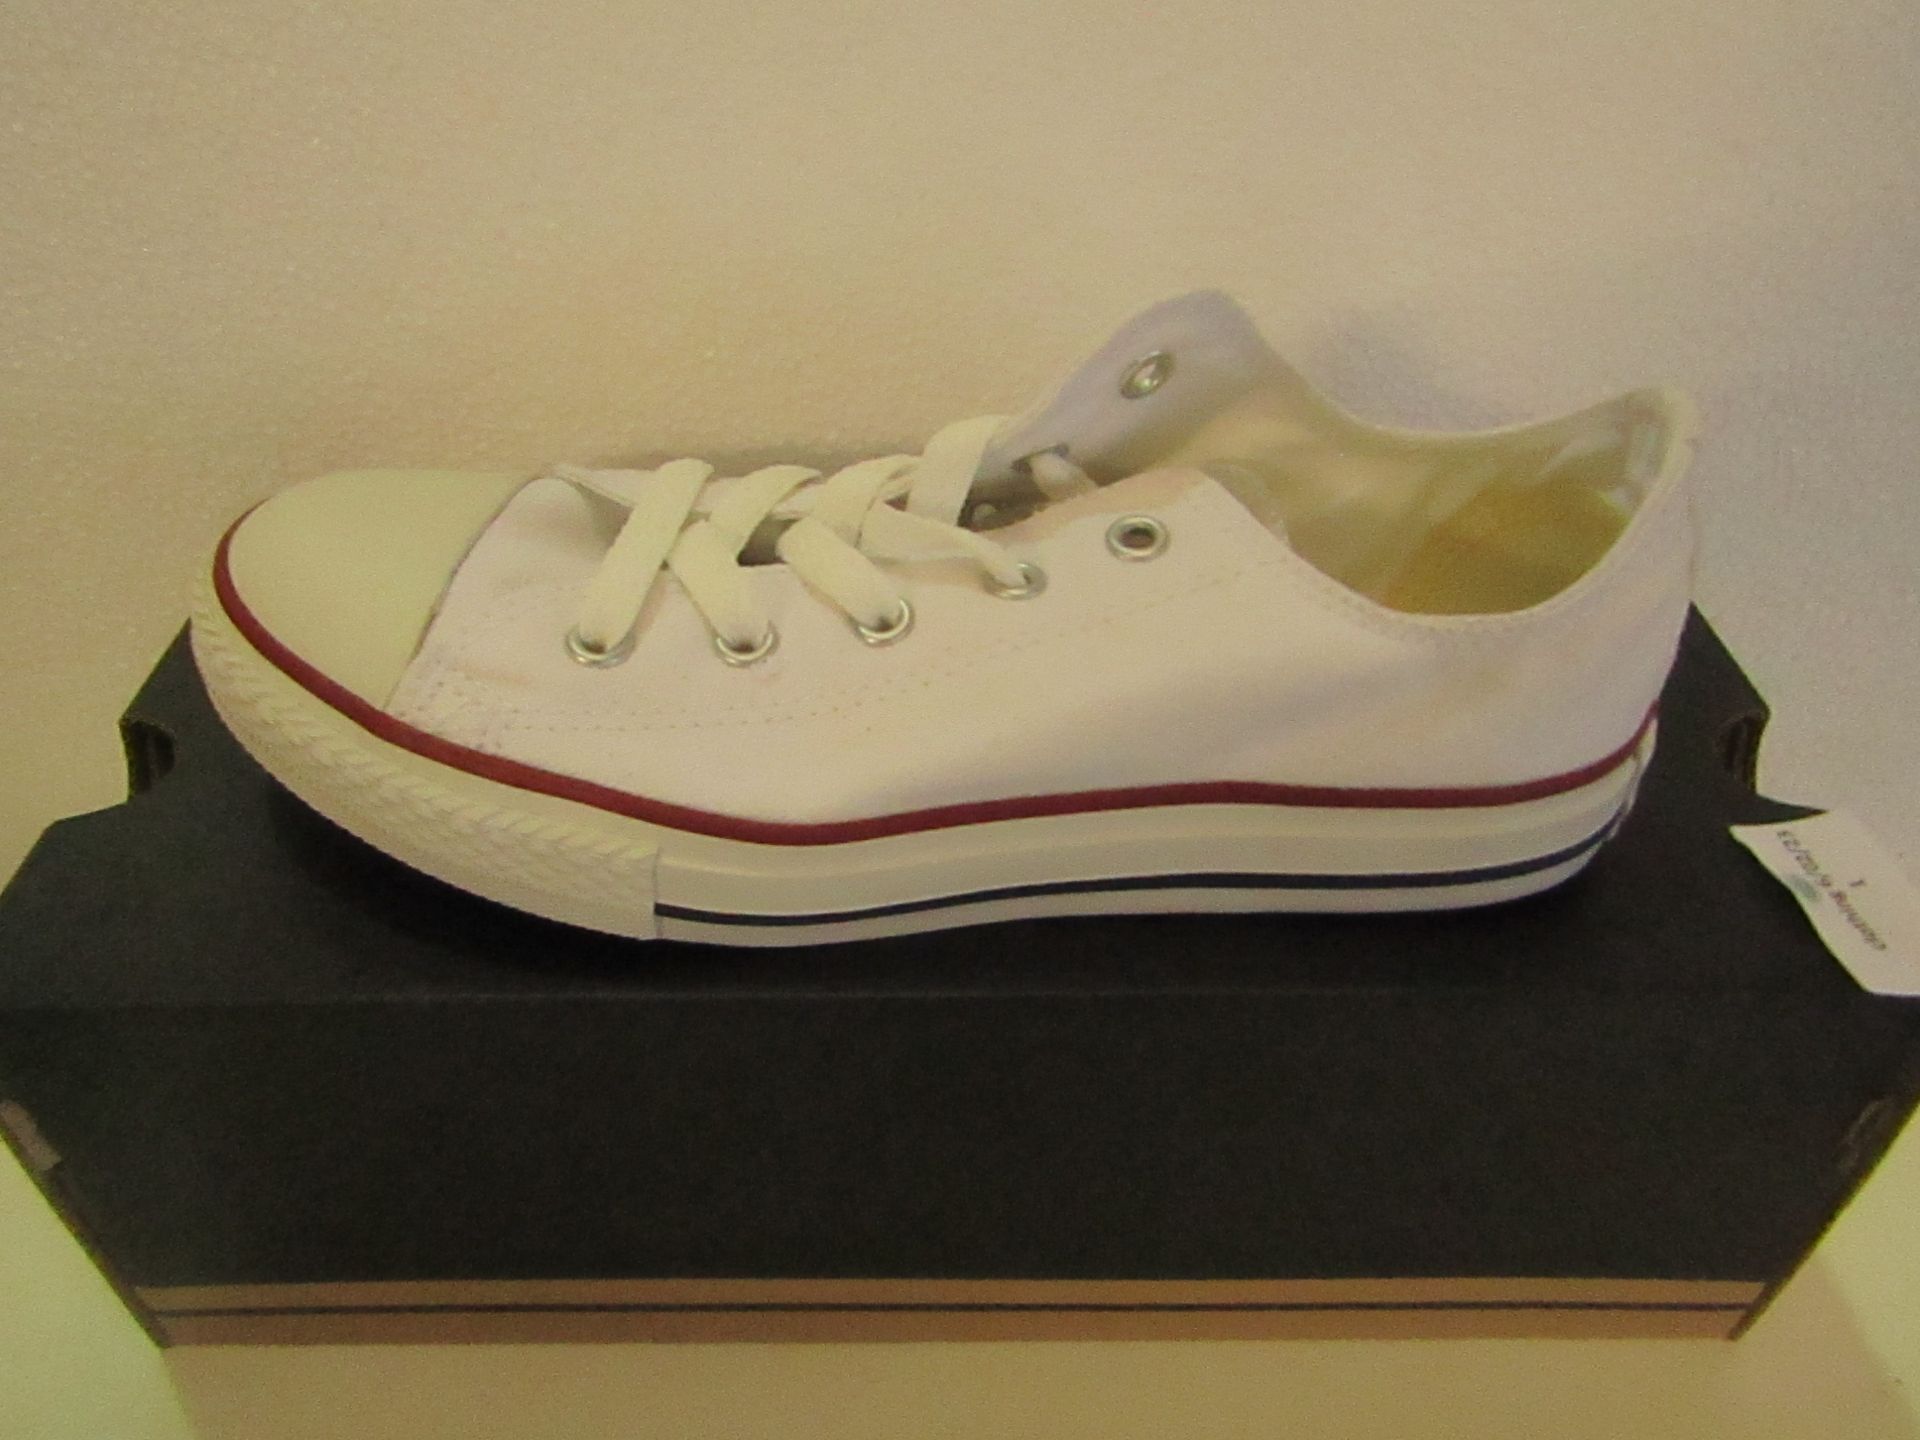 Converse All Star Optical White Canvas Trainer size UK 2.5 new & boxed